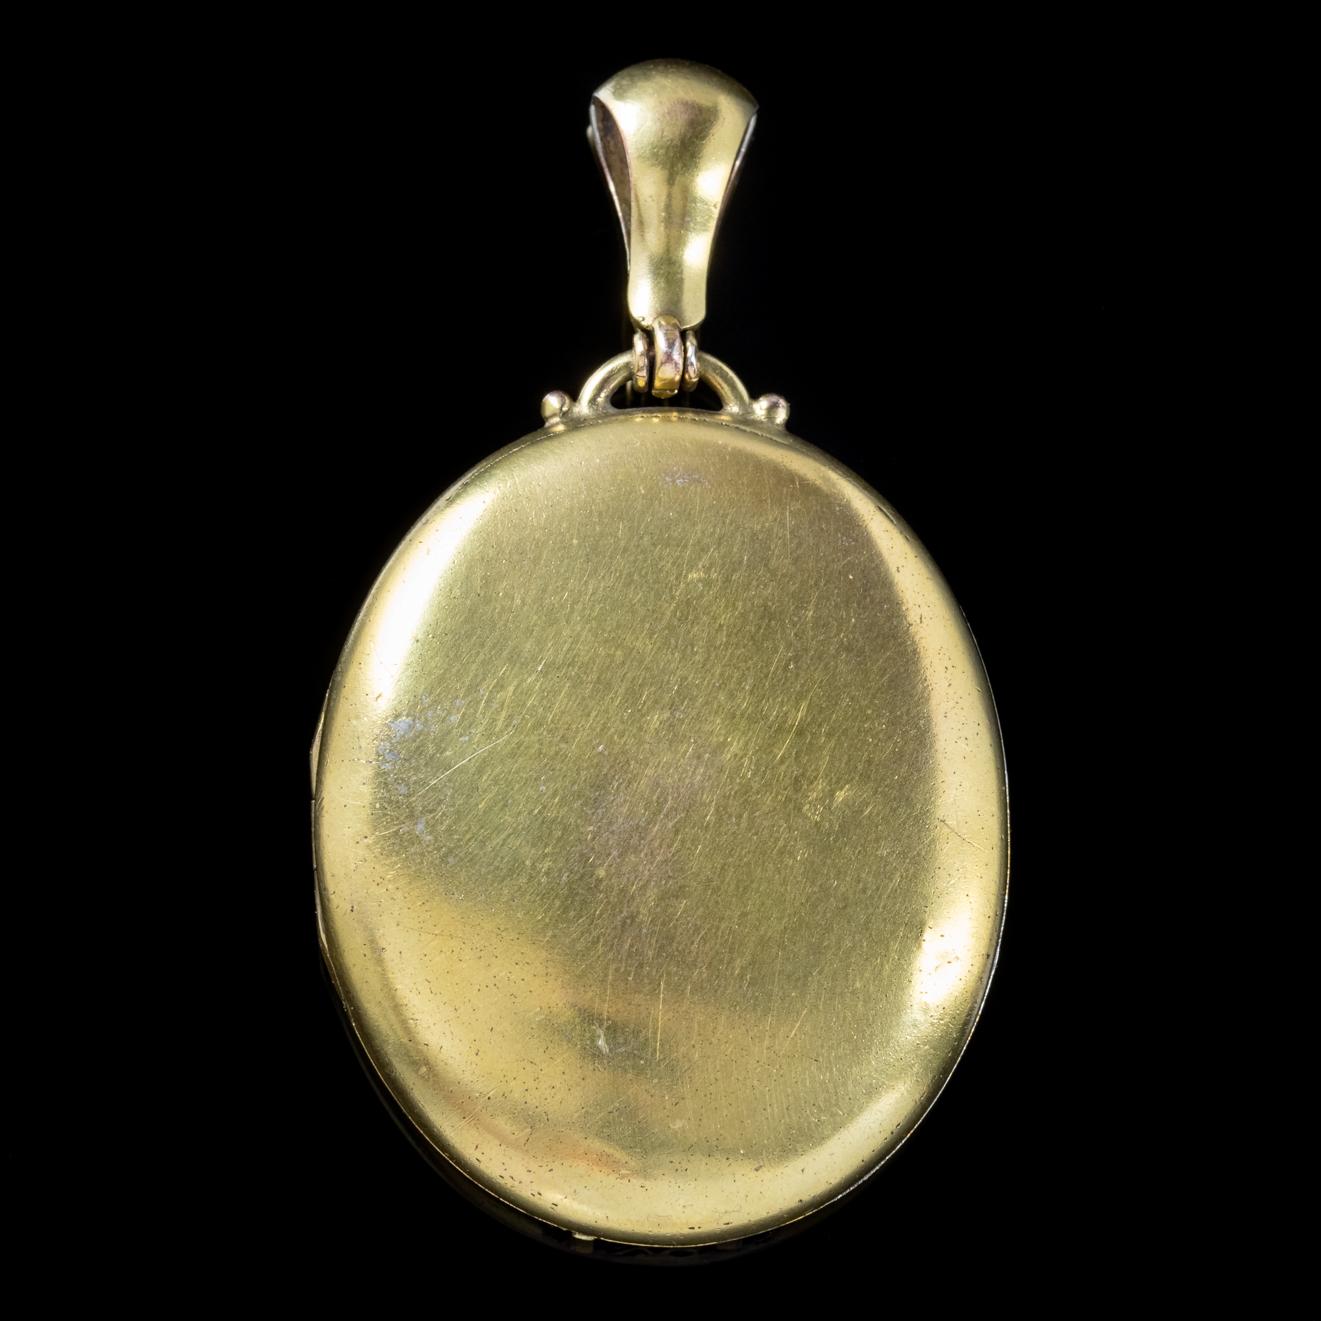 This exquisite large antique Victorian Locket is set in Silver and gilded in Yellow Gold with a decorative strip down the front which has been beautifully engraved. 

The piece opens and closes securely and is complete with rims and windows inside